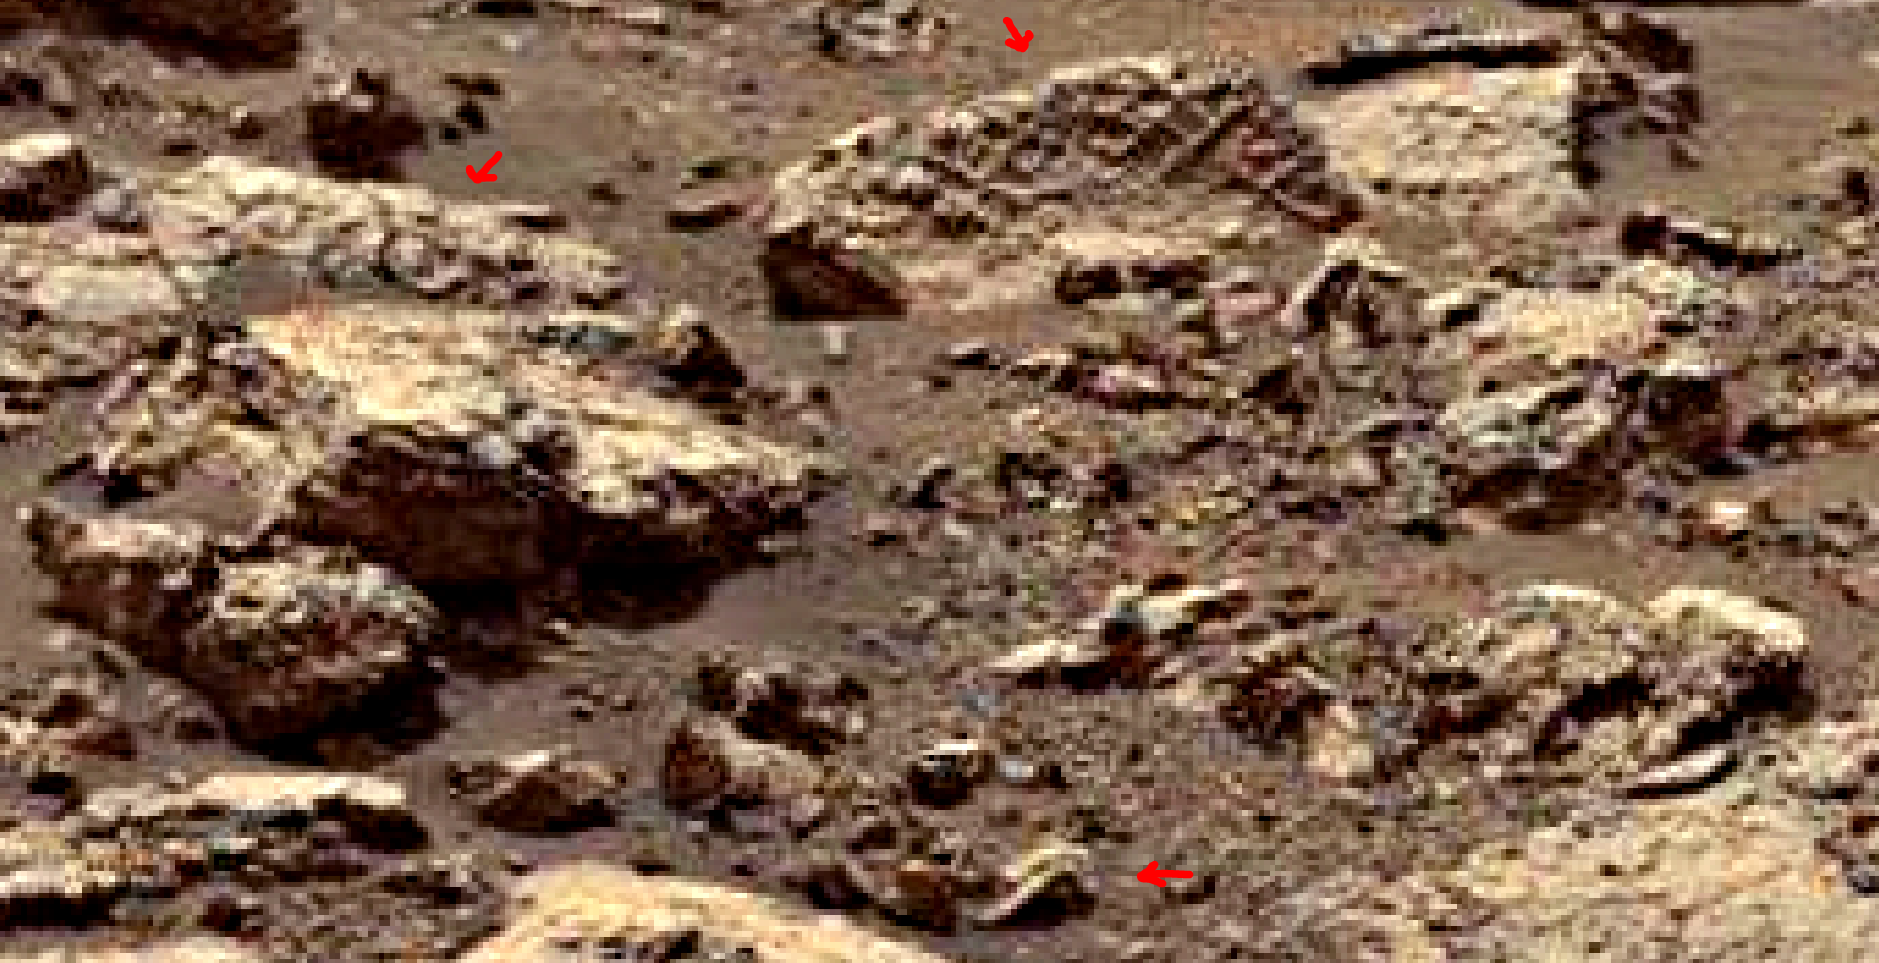 mars-sol-1485-anomaly-artifacts-6-was-life-on-mars